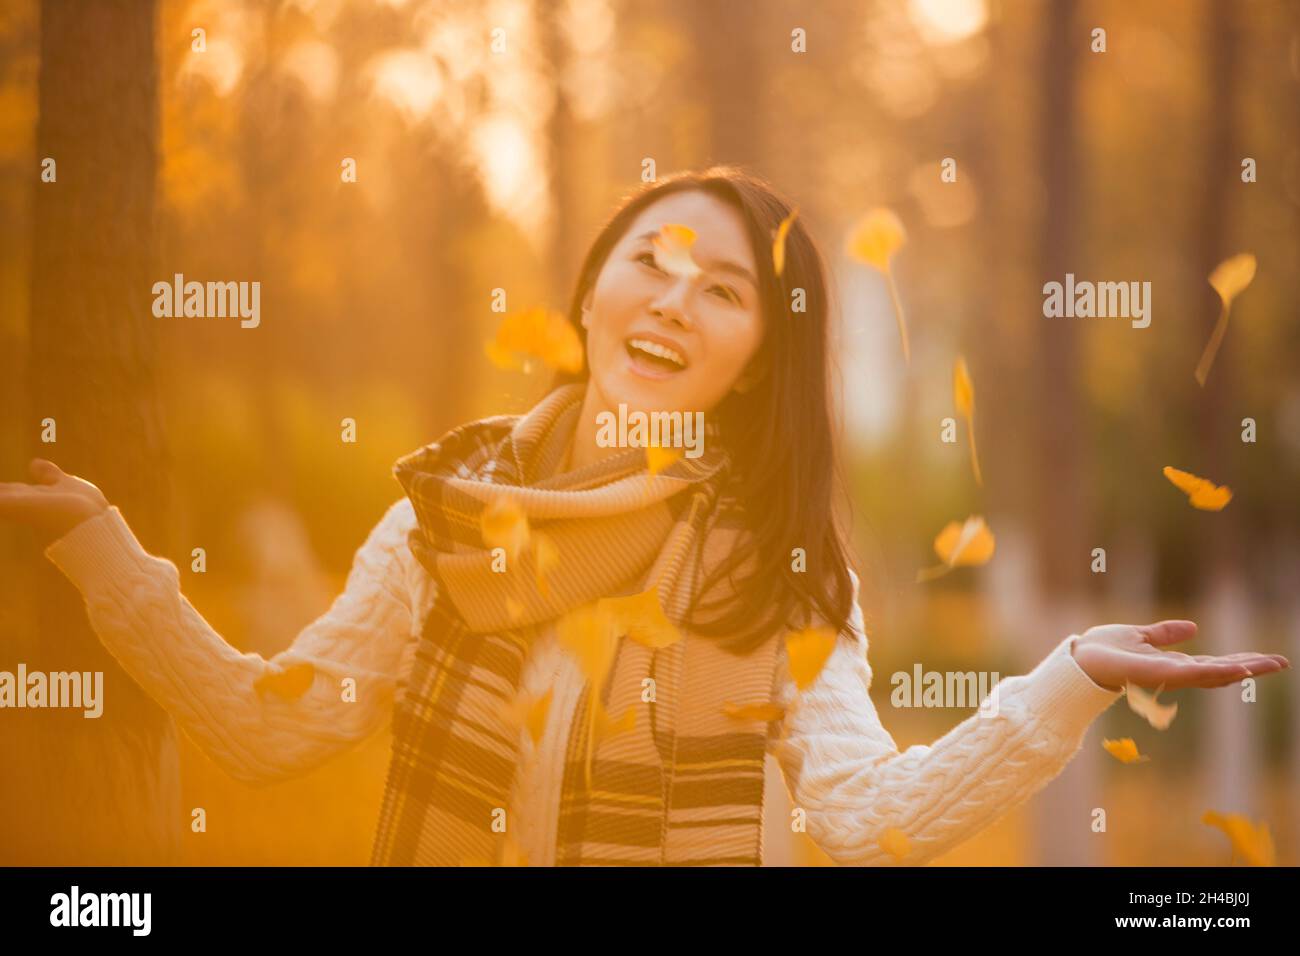 Happy and beautiful young woman Stock Photo